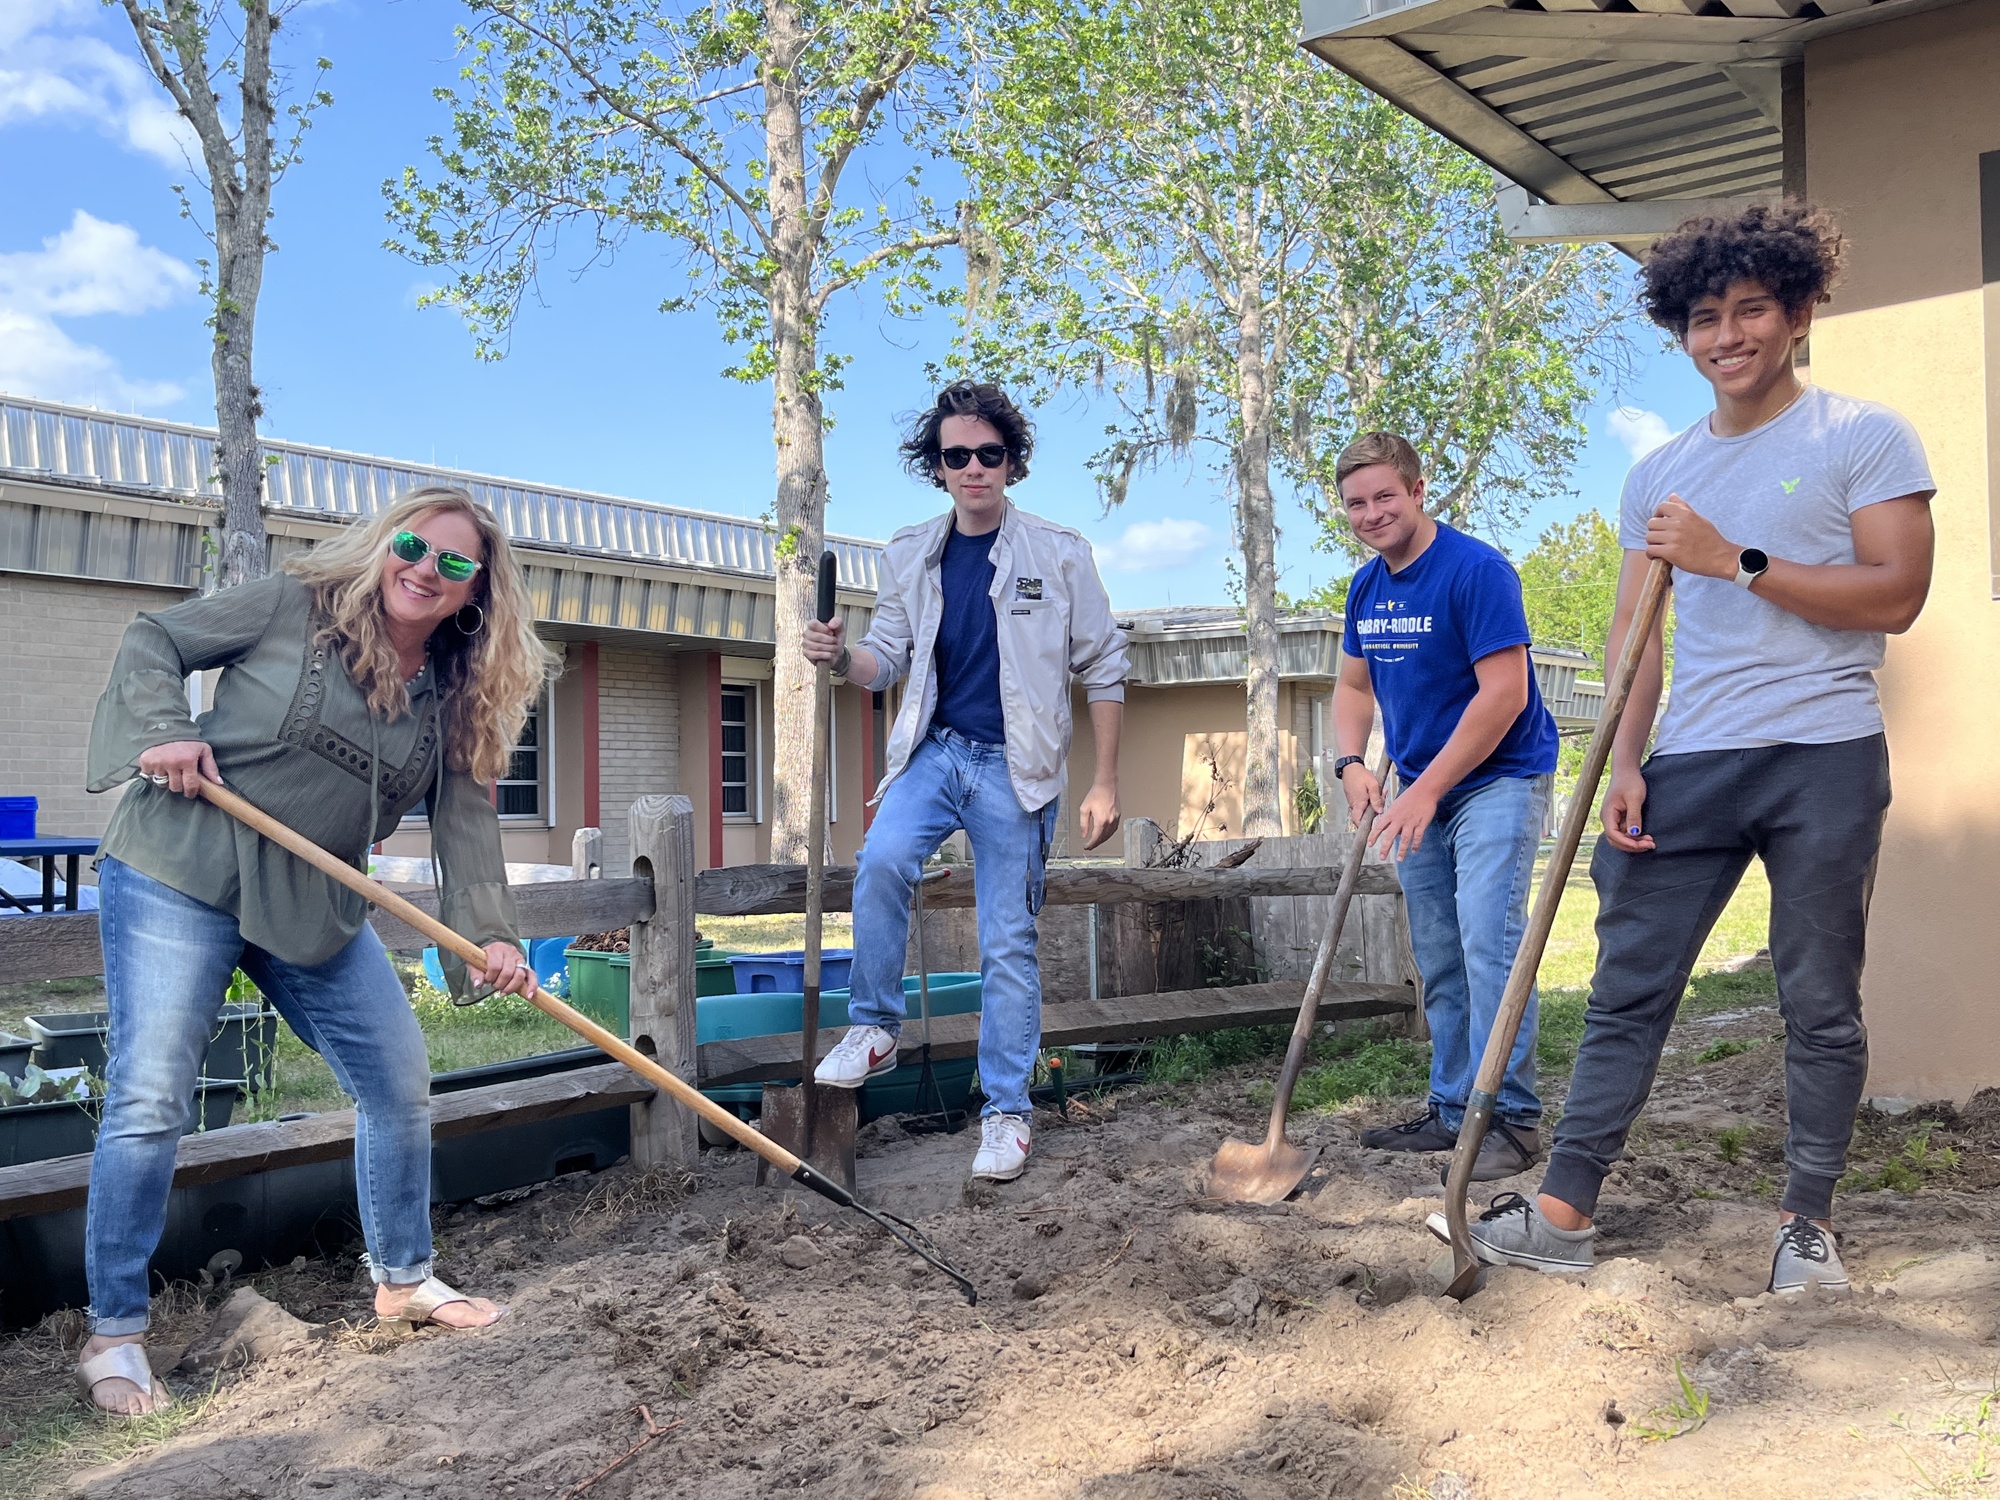 Audrey Quale, a retired Braden River Elementary School teacher, helps high school seniors and her former students Conor Reilly, Jacob Jackson and Zechariah Johnston try to find the time capsule they buried together in fifth grade.